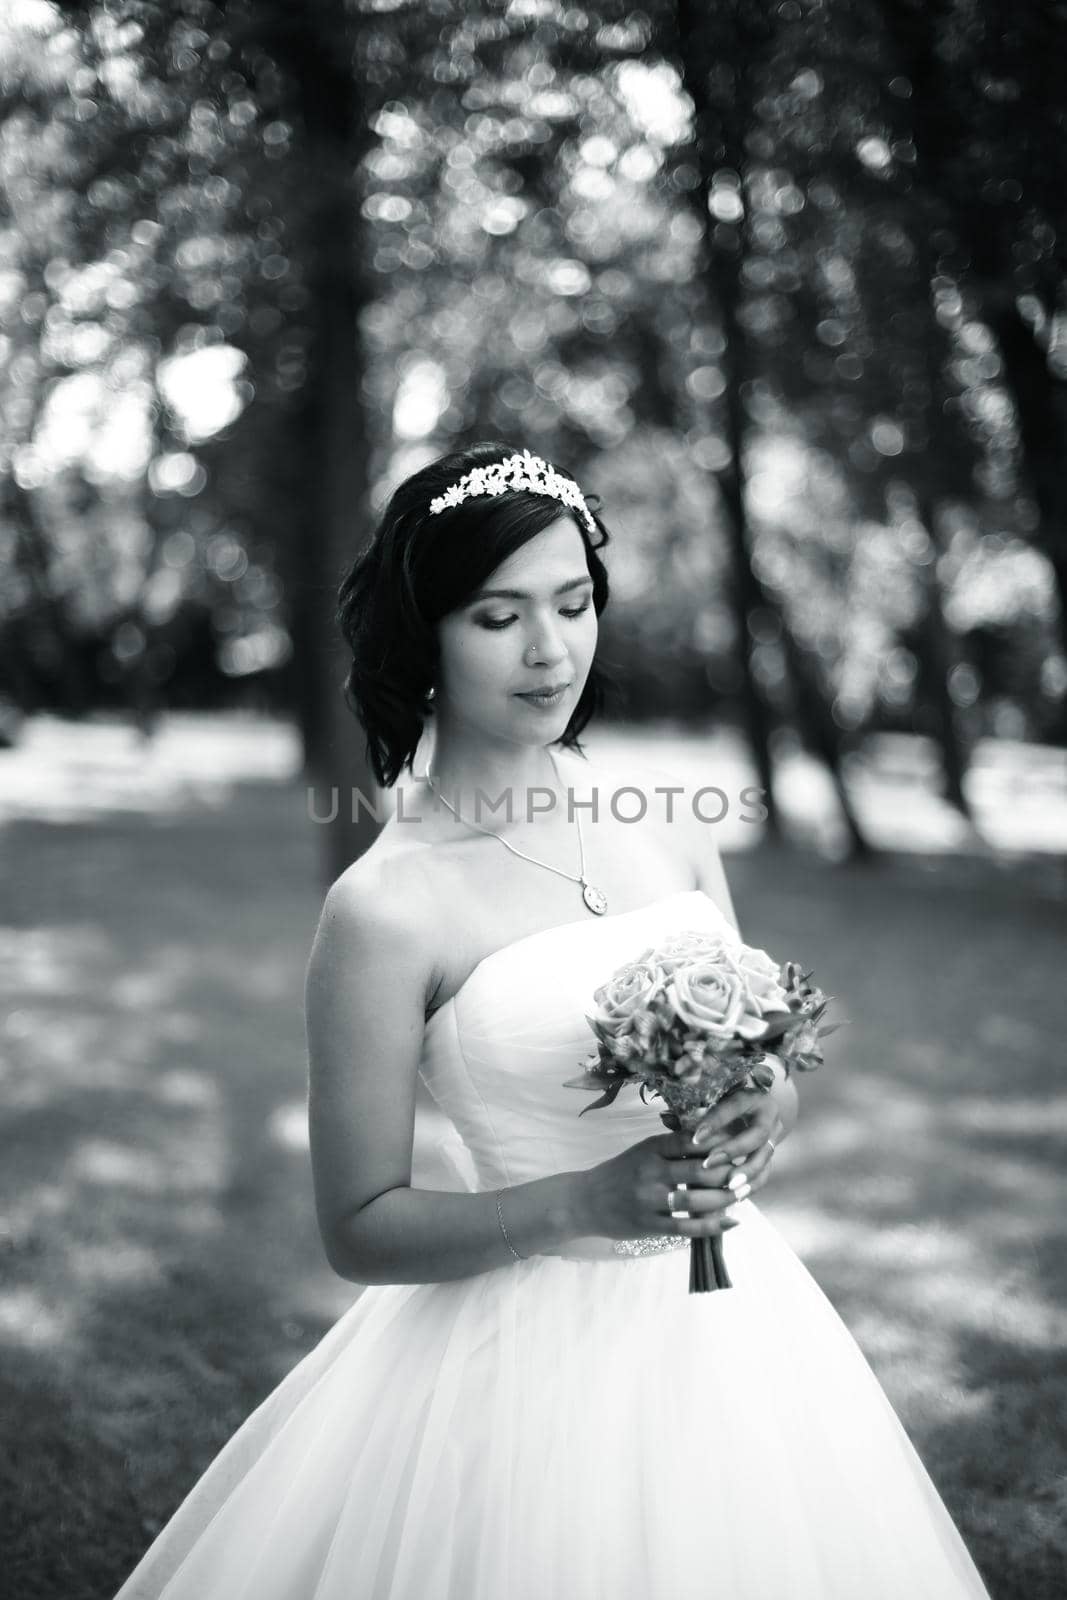 black-and-white photo.portrait of bride with bouquet.photo in retro style.